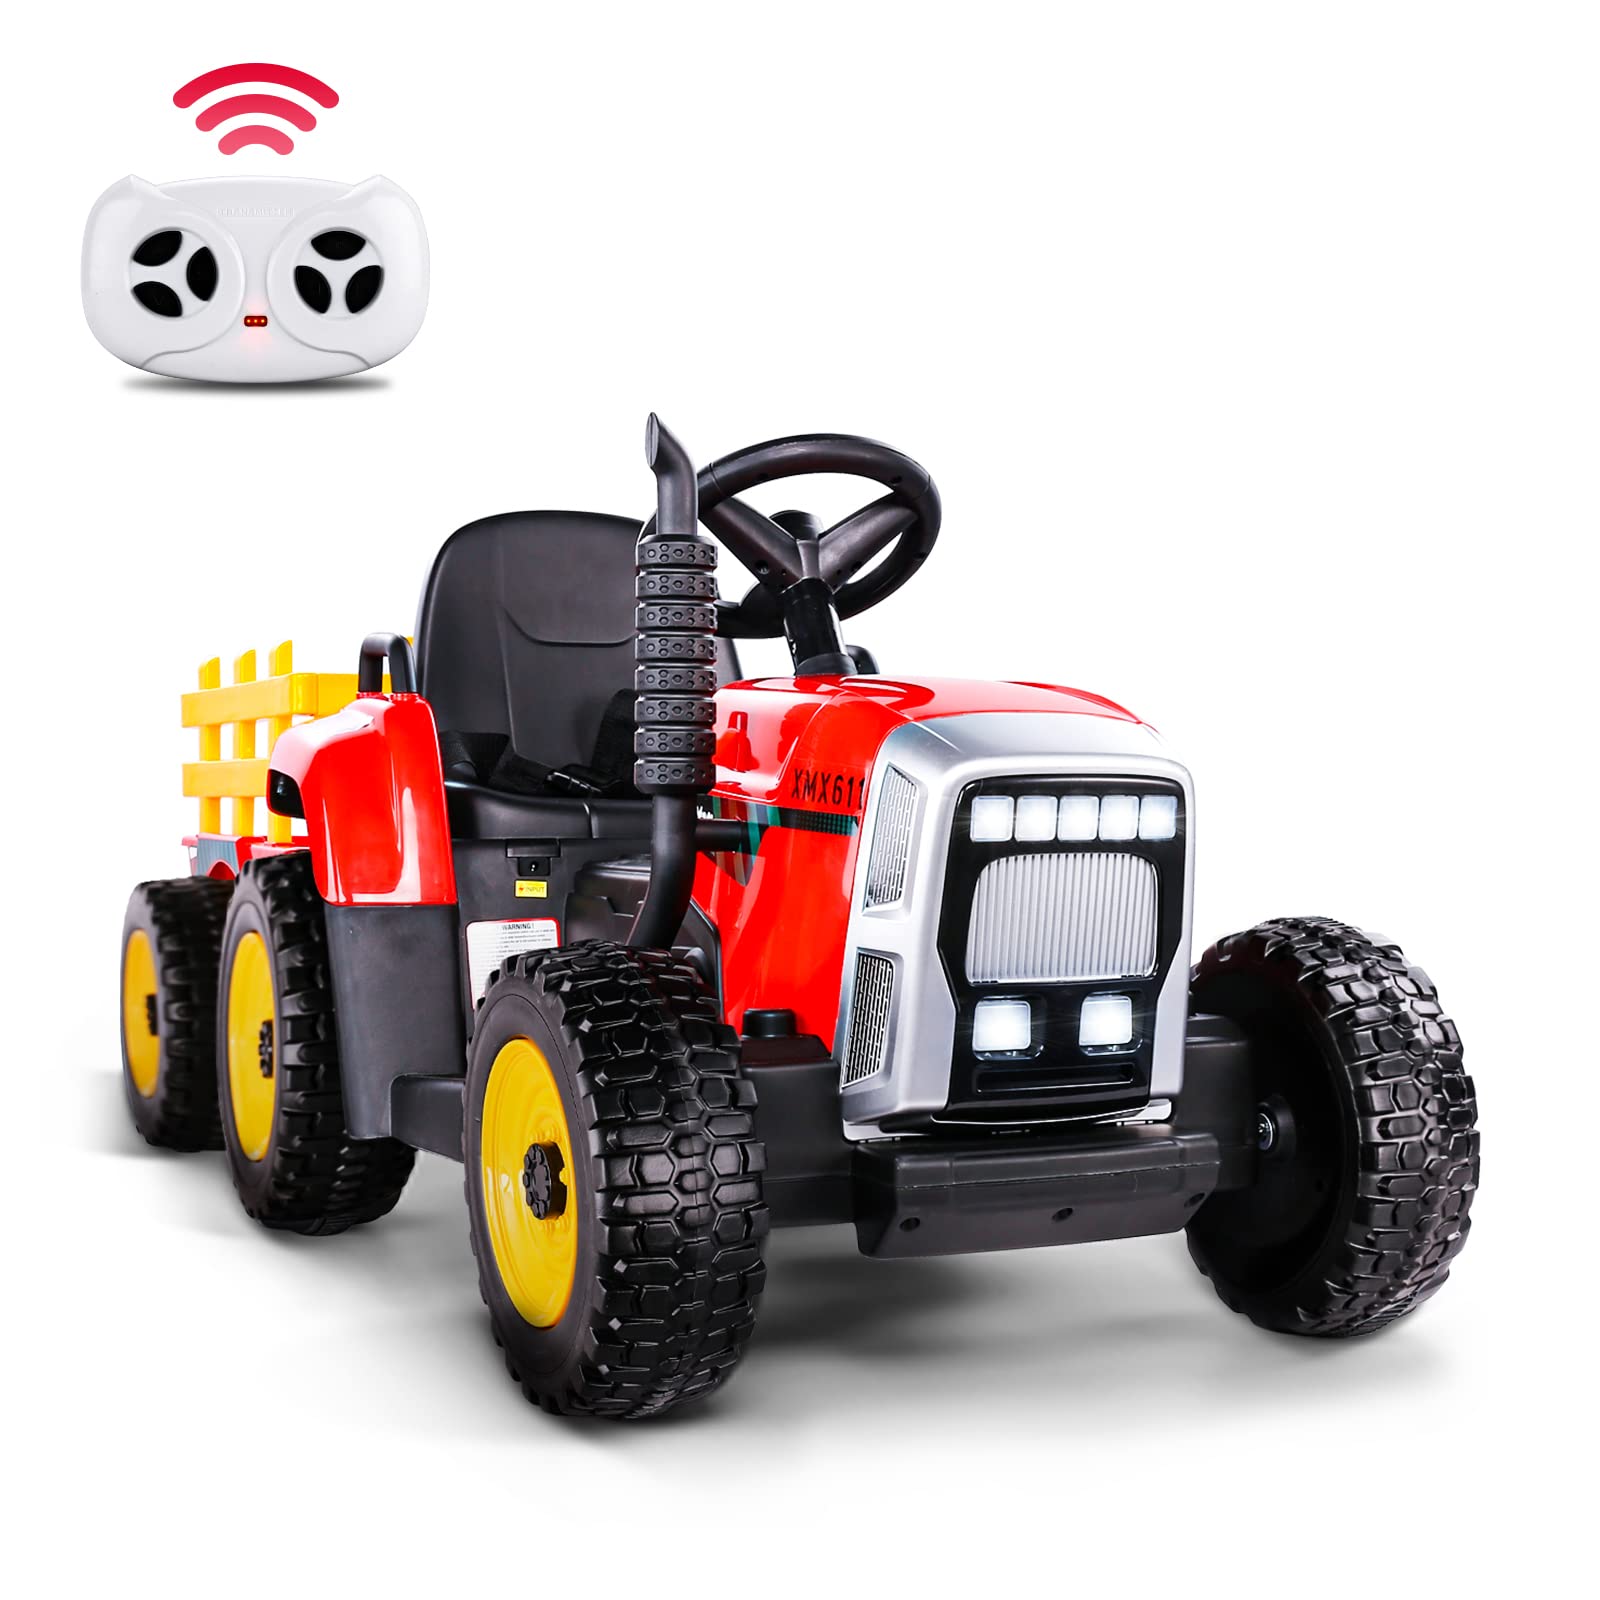 Kids Ride on Tractor with Remote Control, 12V Battery Powered Electric Tractor for Kids Bluetooth Music/USB, 3-Gear-Shift, Safety Belt, 25W Dual Motors, 7-LED Lights